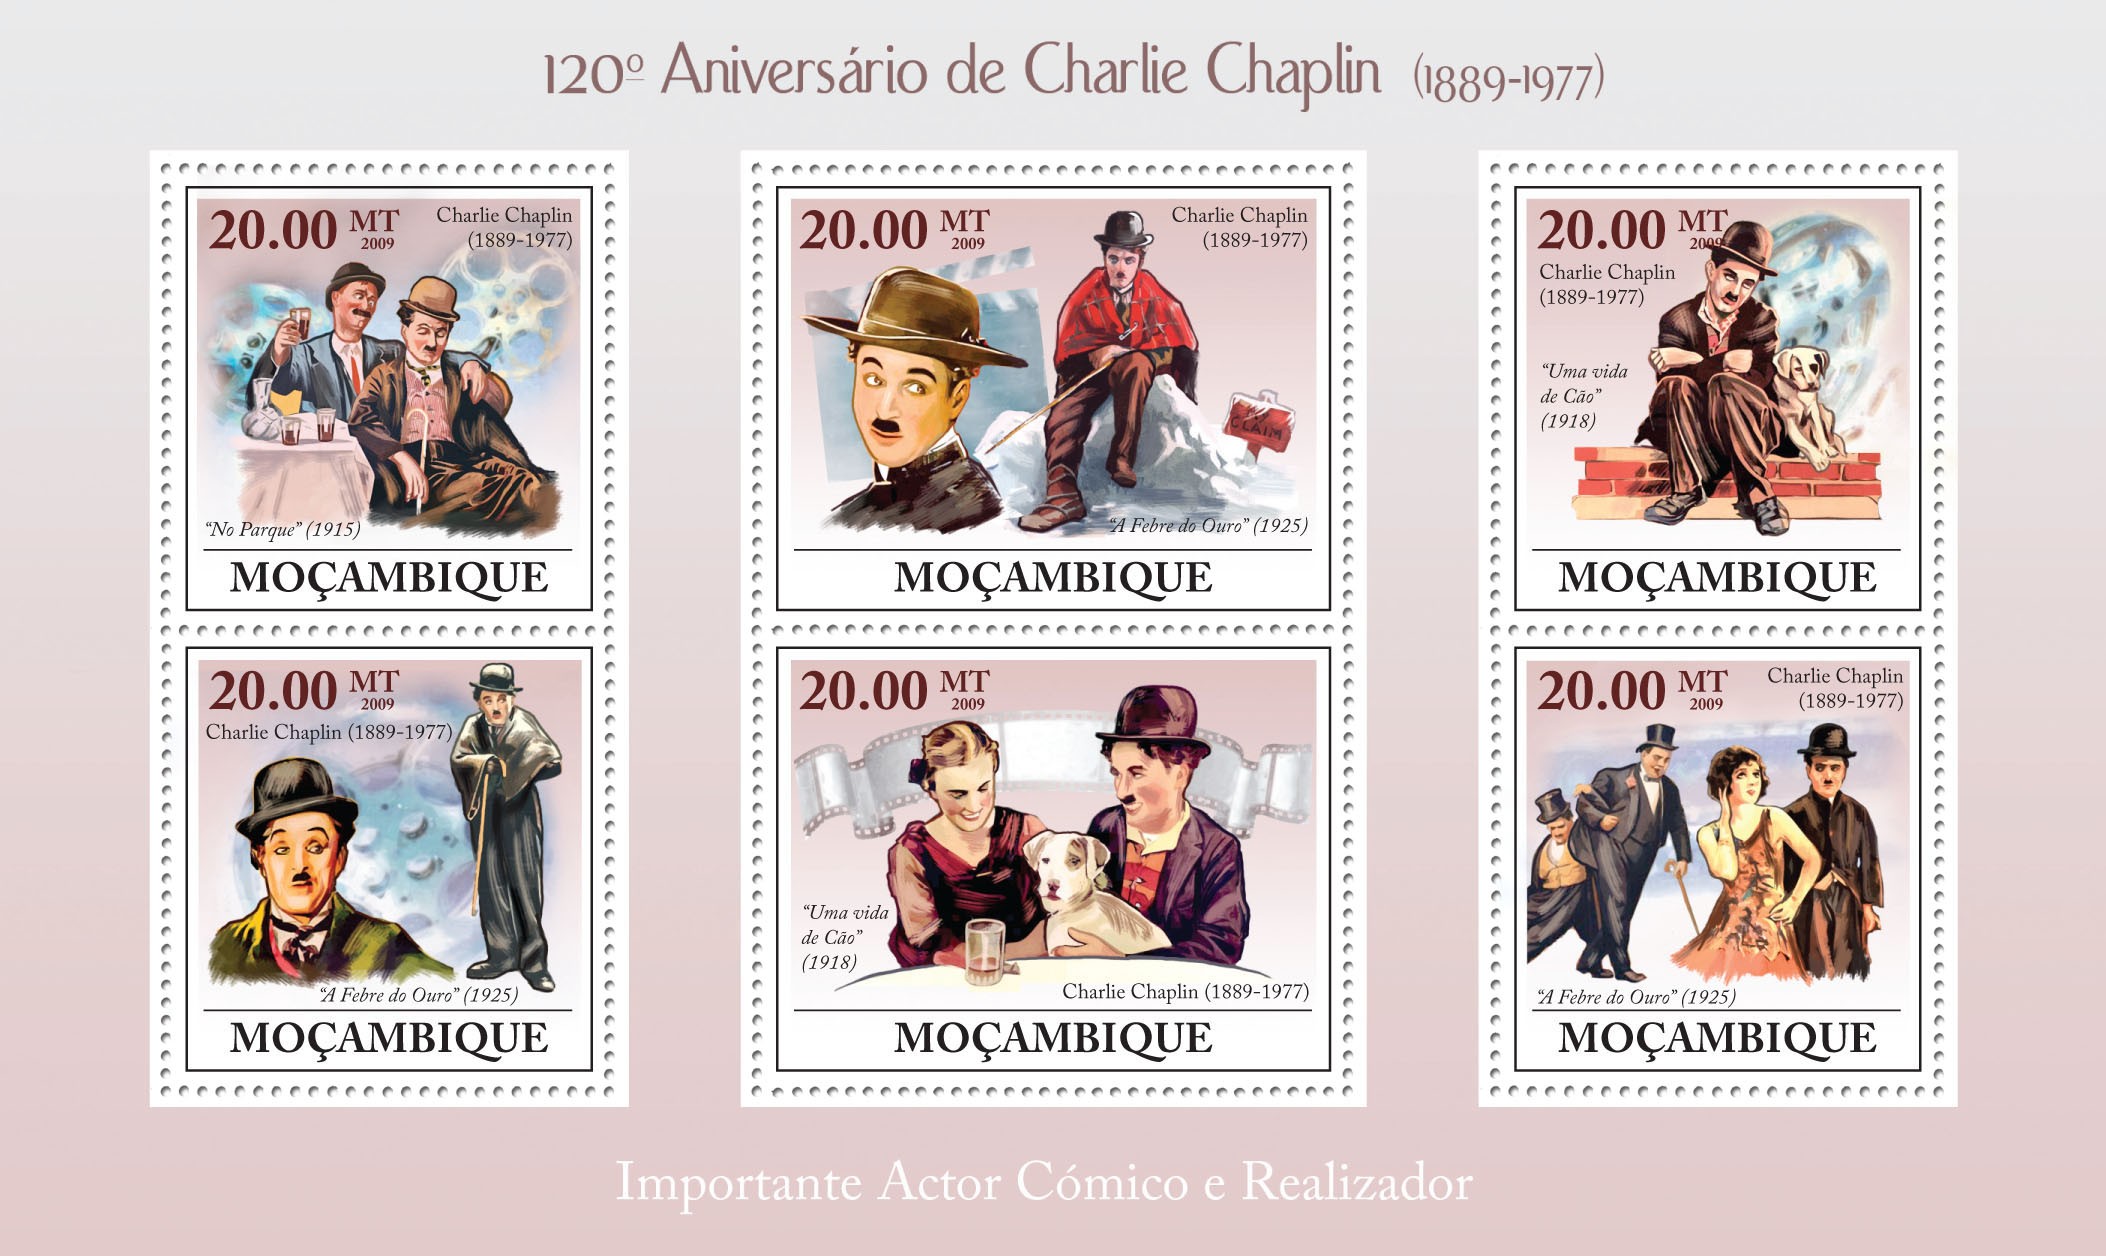 120th Birthday of Charles Chaplin (1889-1977) - Issue of Mozambique postage Stamps